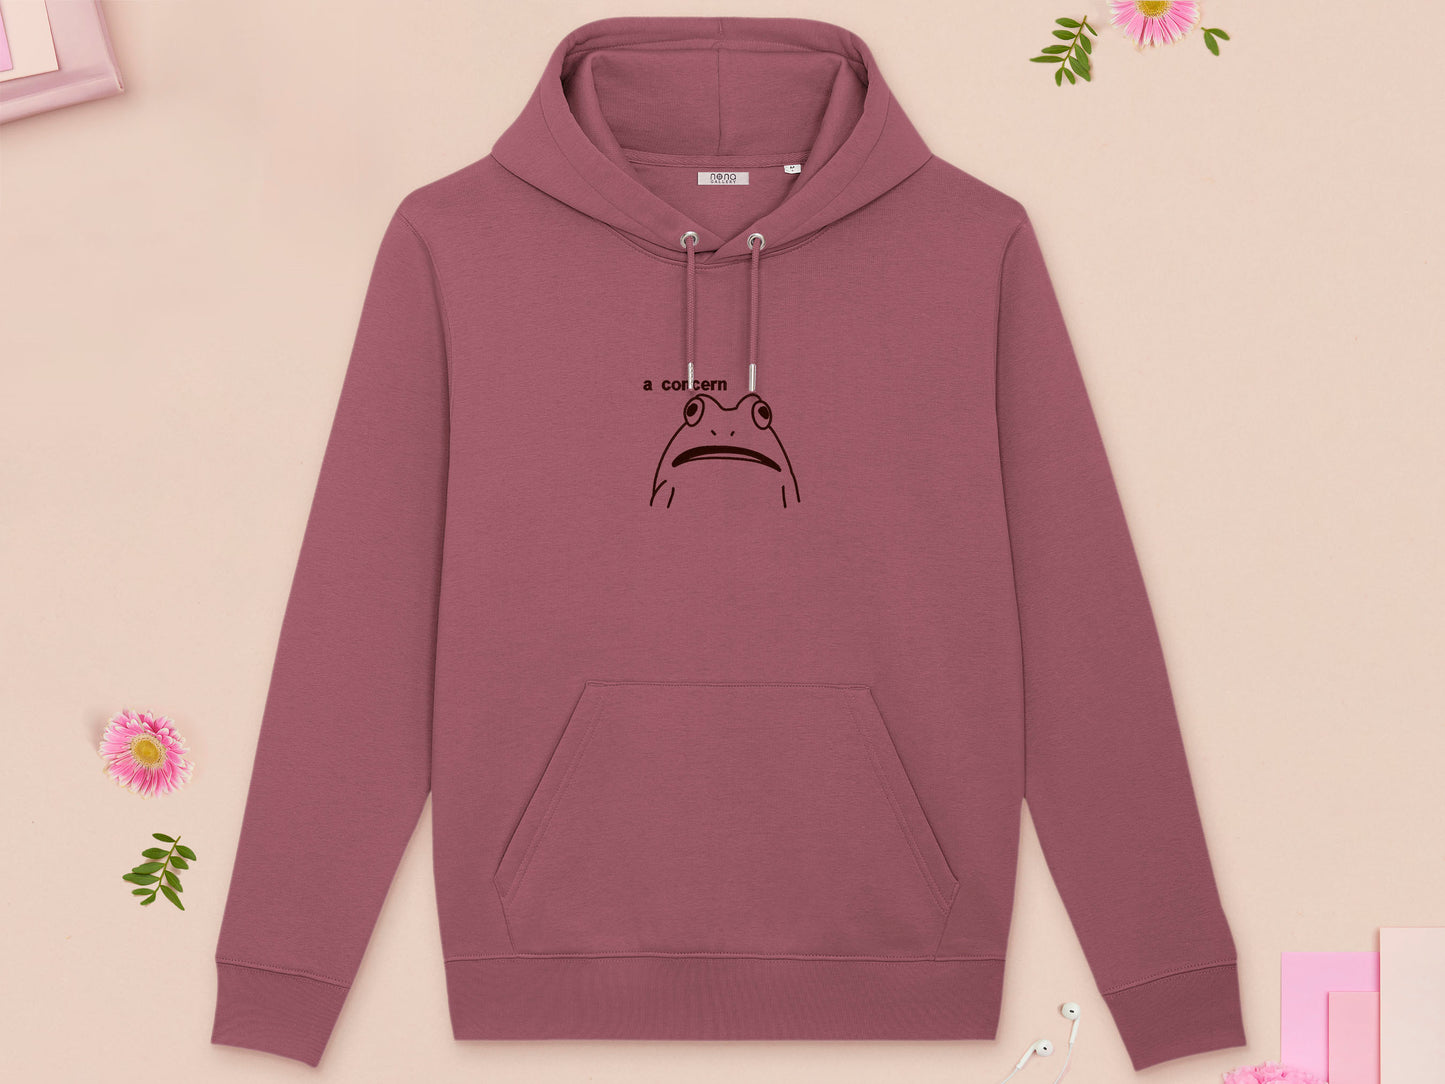 A red long sleeve fleece hoodie, with an embroidered brown thread design of cute confused looking frog with the text a concern.